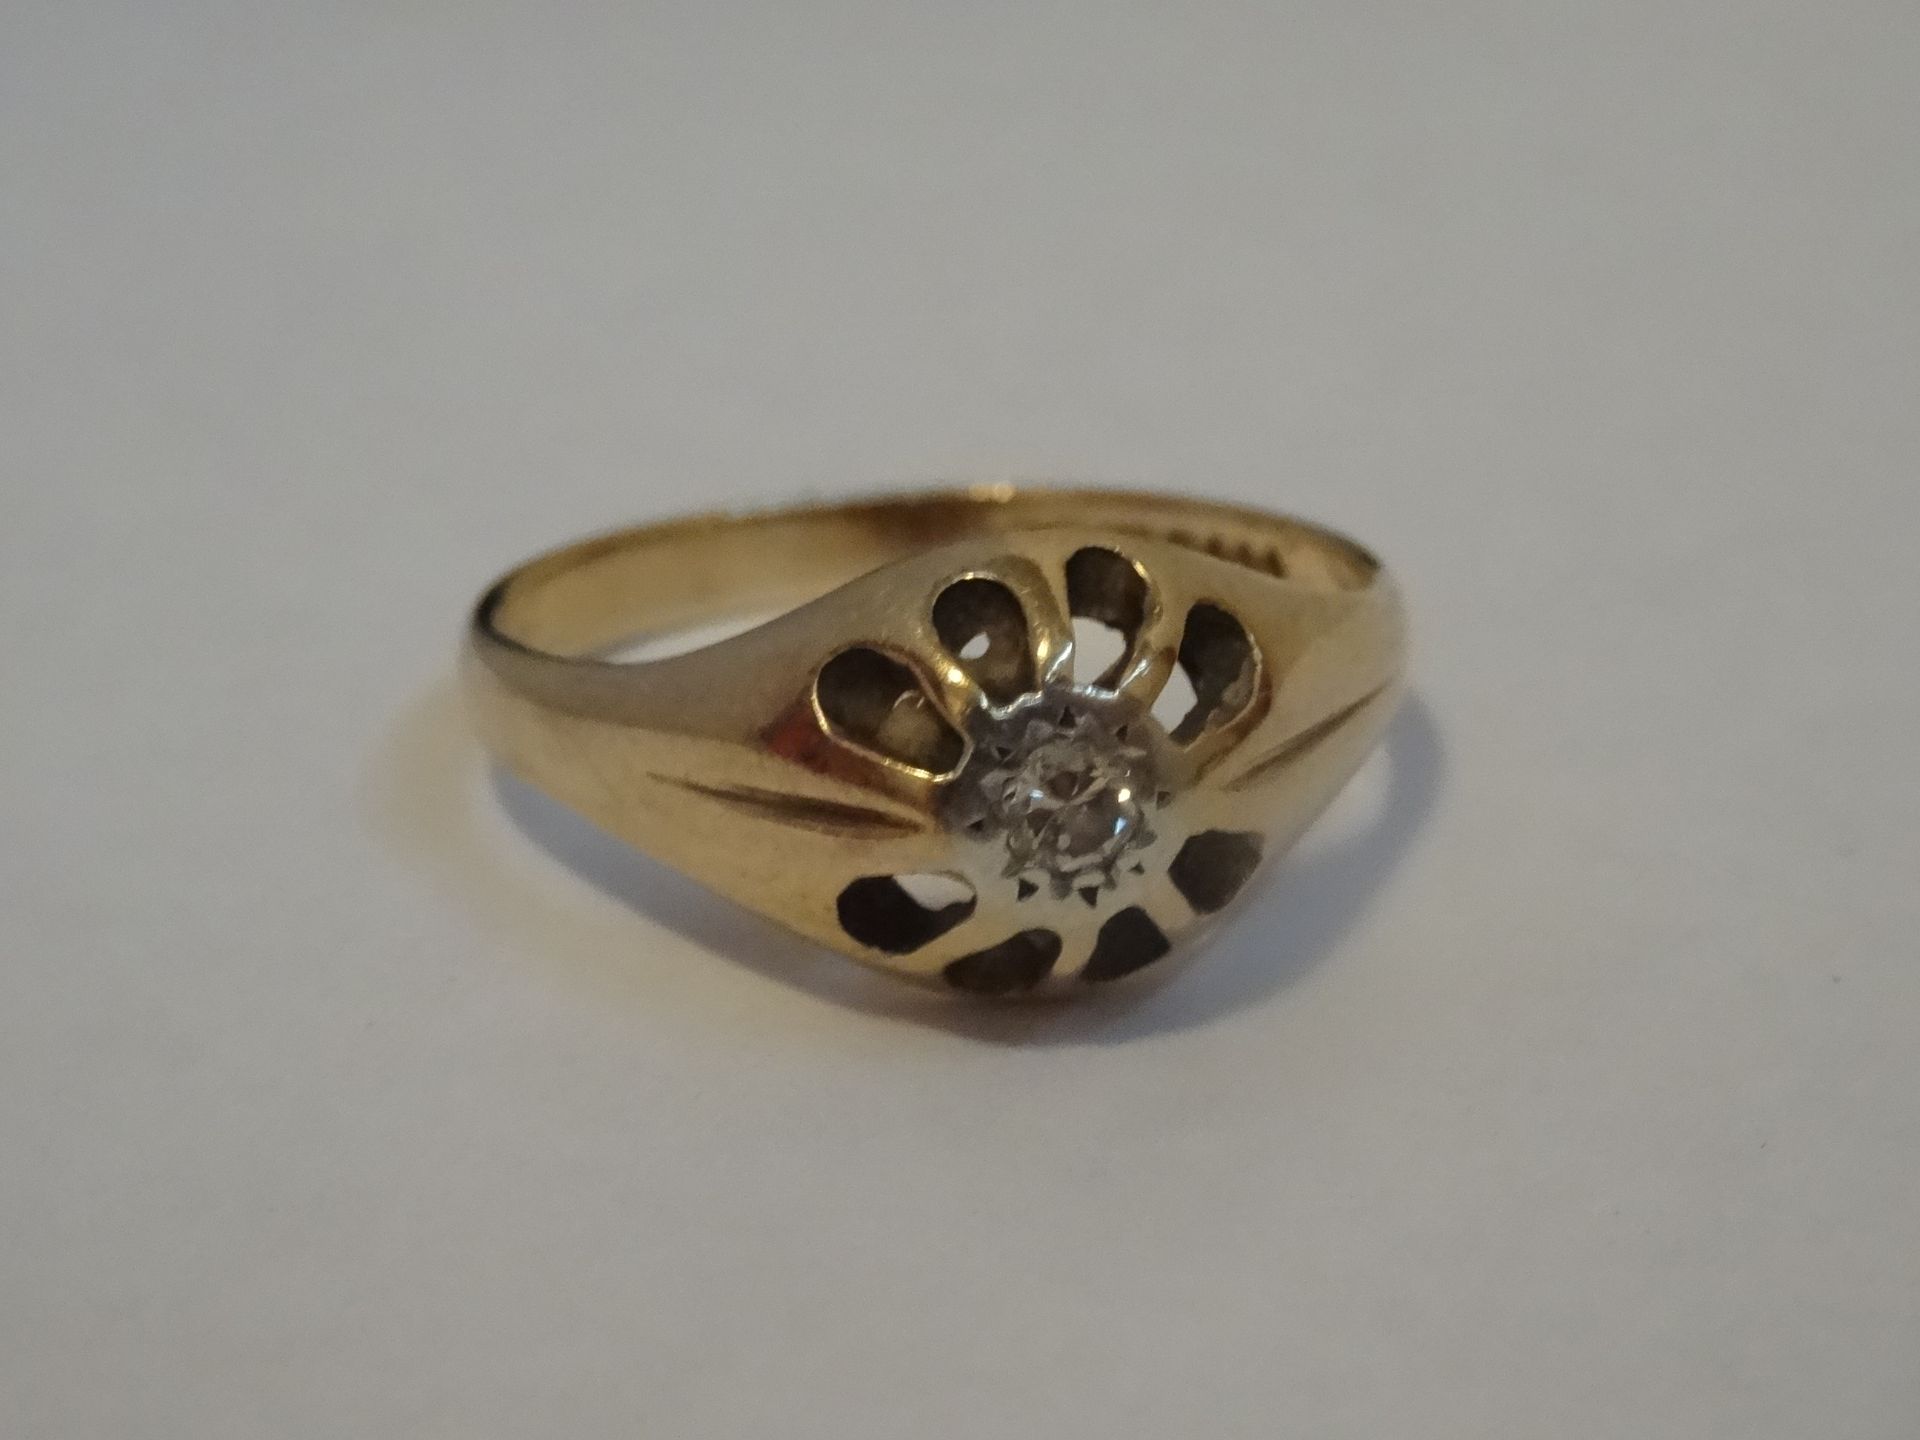 9 Carat Yellow Gold Single Stone Claw Design Ring. Total Piece Weight 2.73 Grams - Image 2 of 3